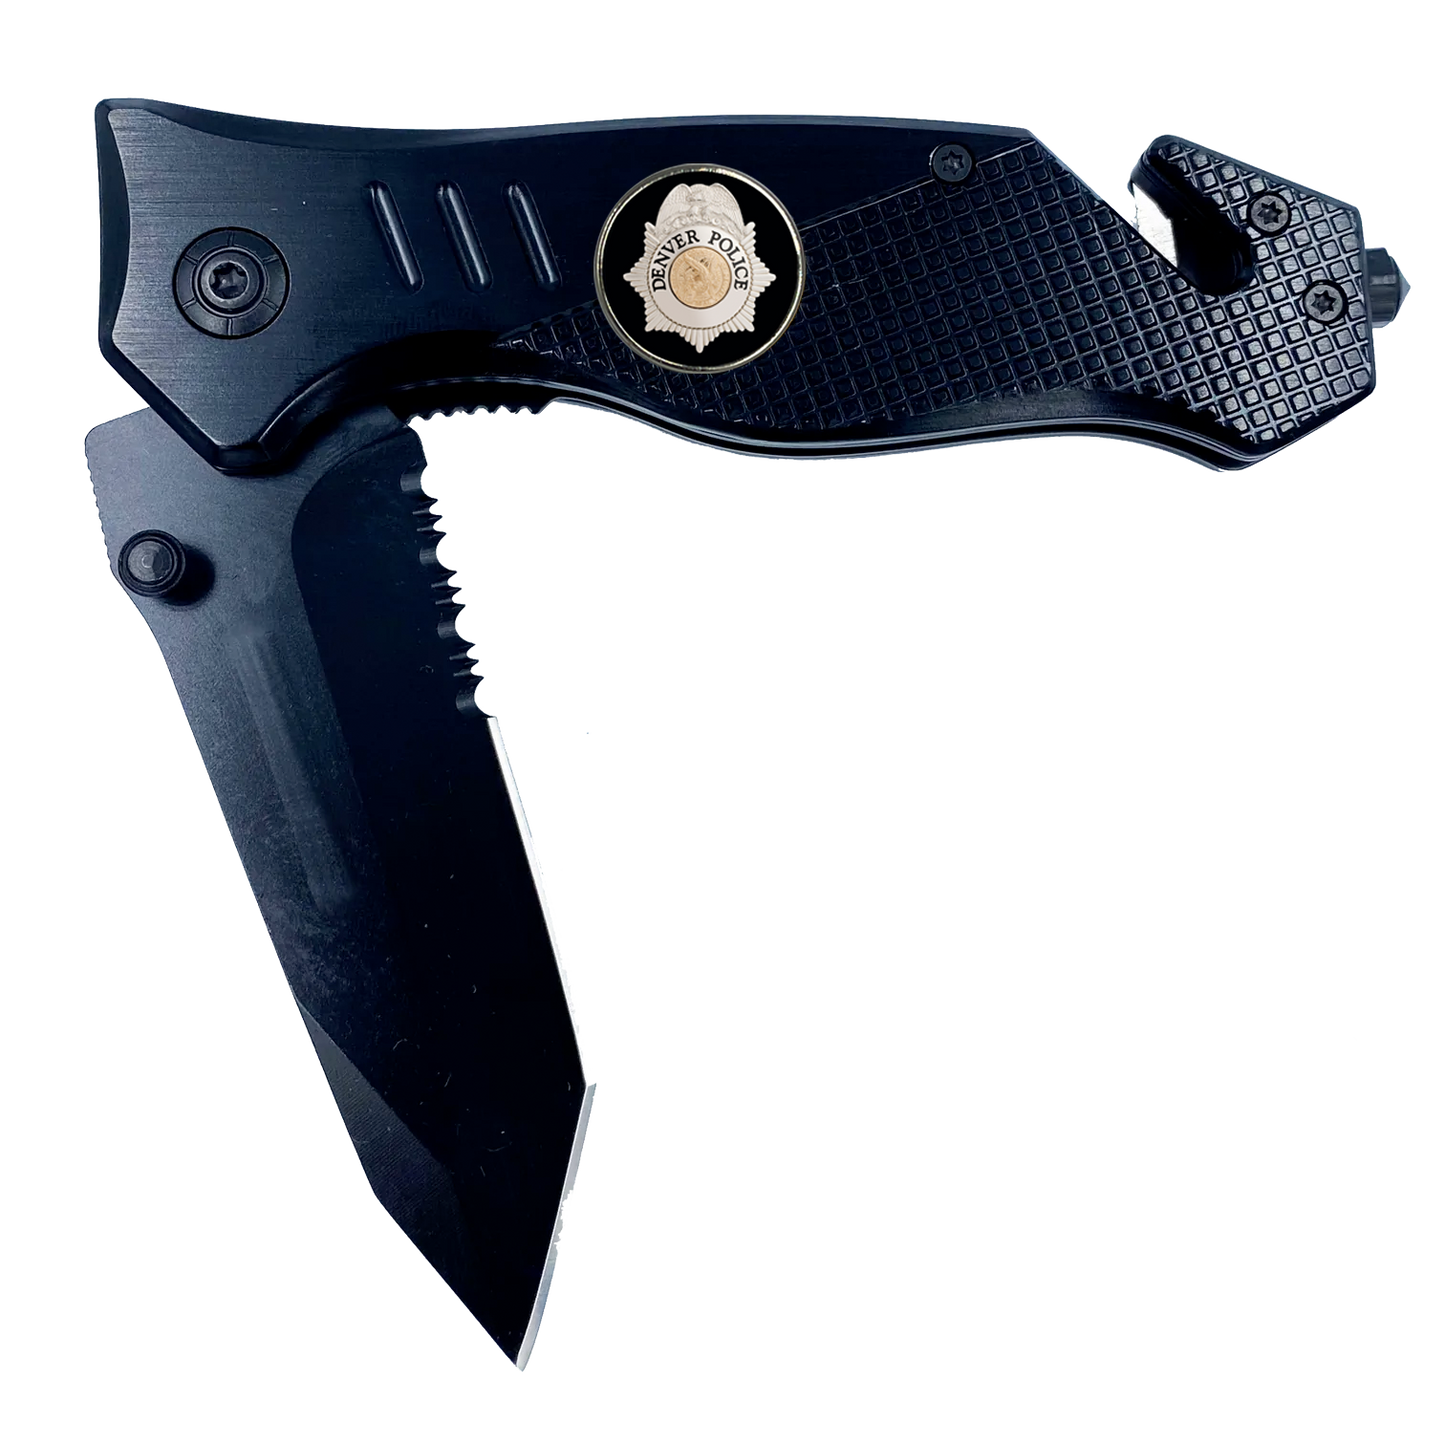 Denver Colorado Police 3-in-1 Tactical Rescue knife tool with Seatbelt Cutter, Steel Serrated Blade, Glass